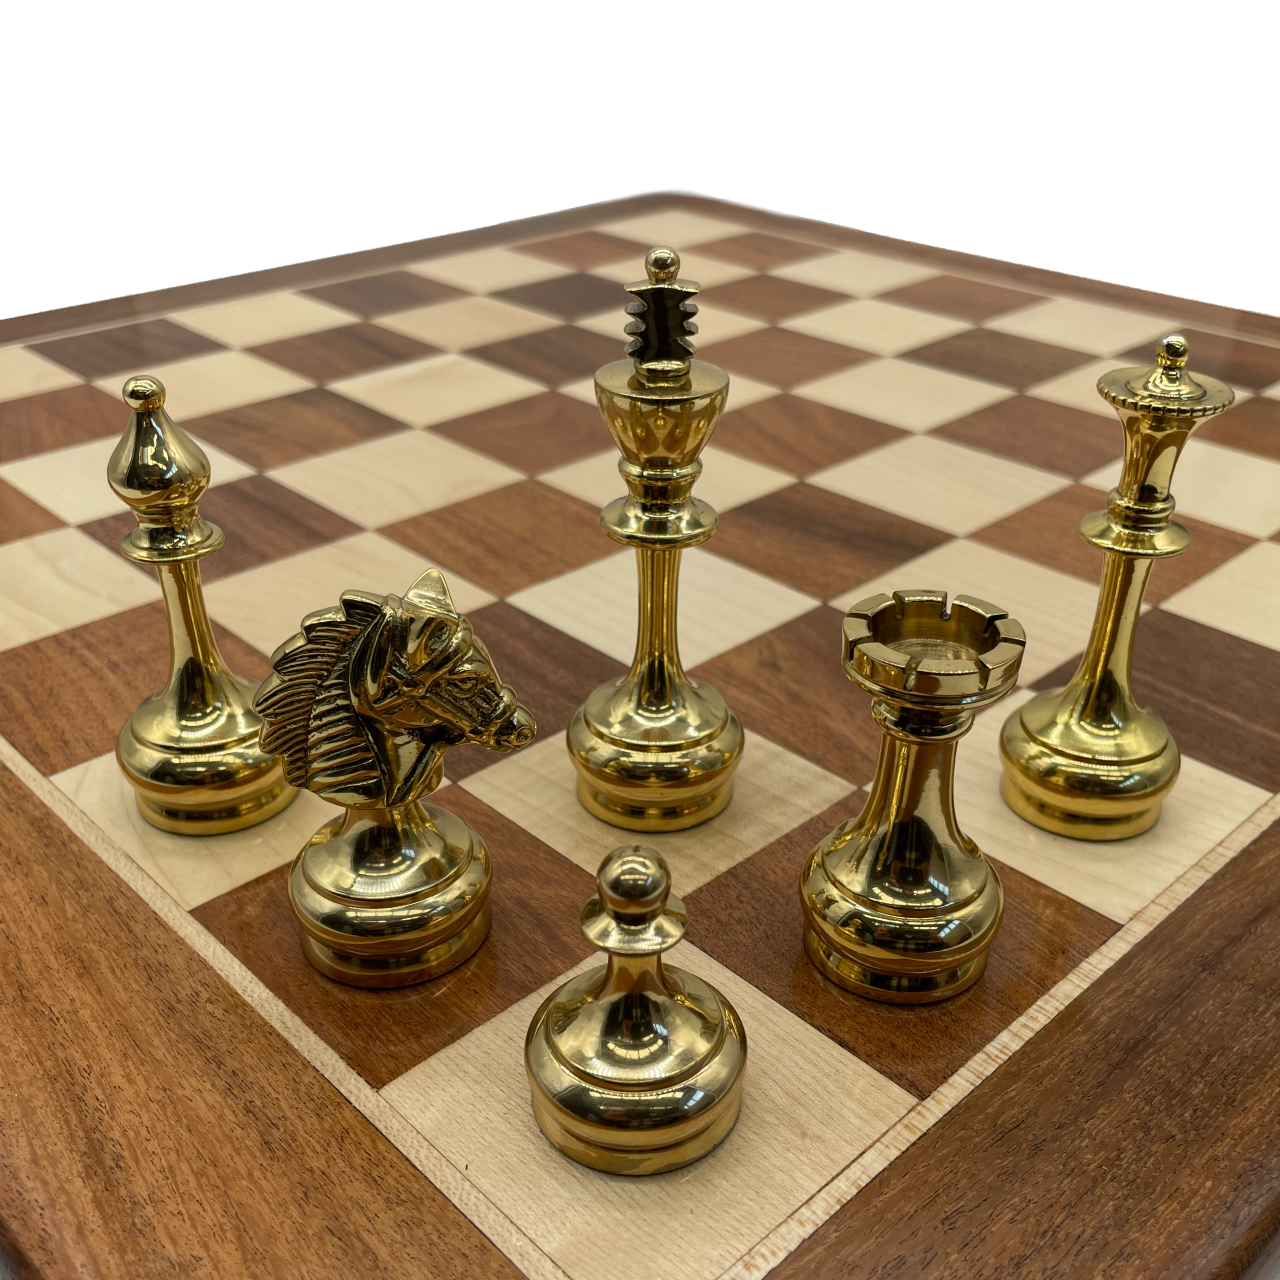 Metal Chess Pieces 2